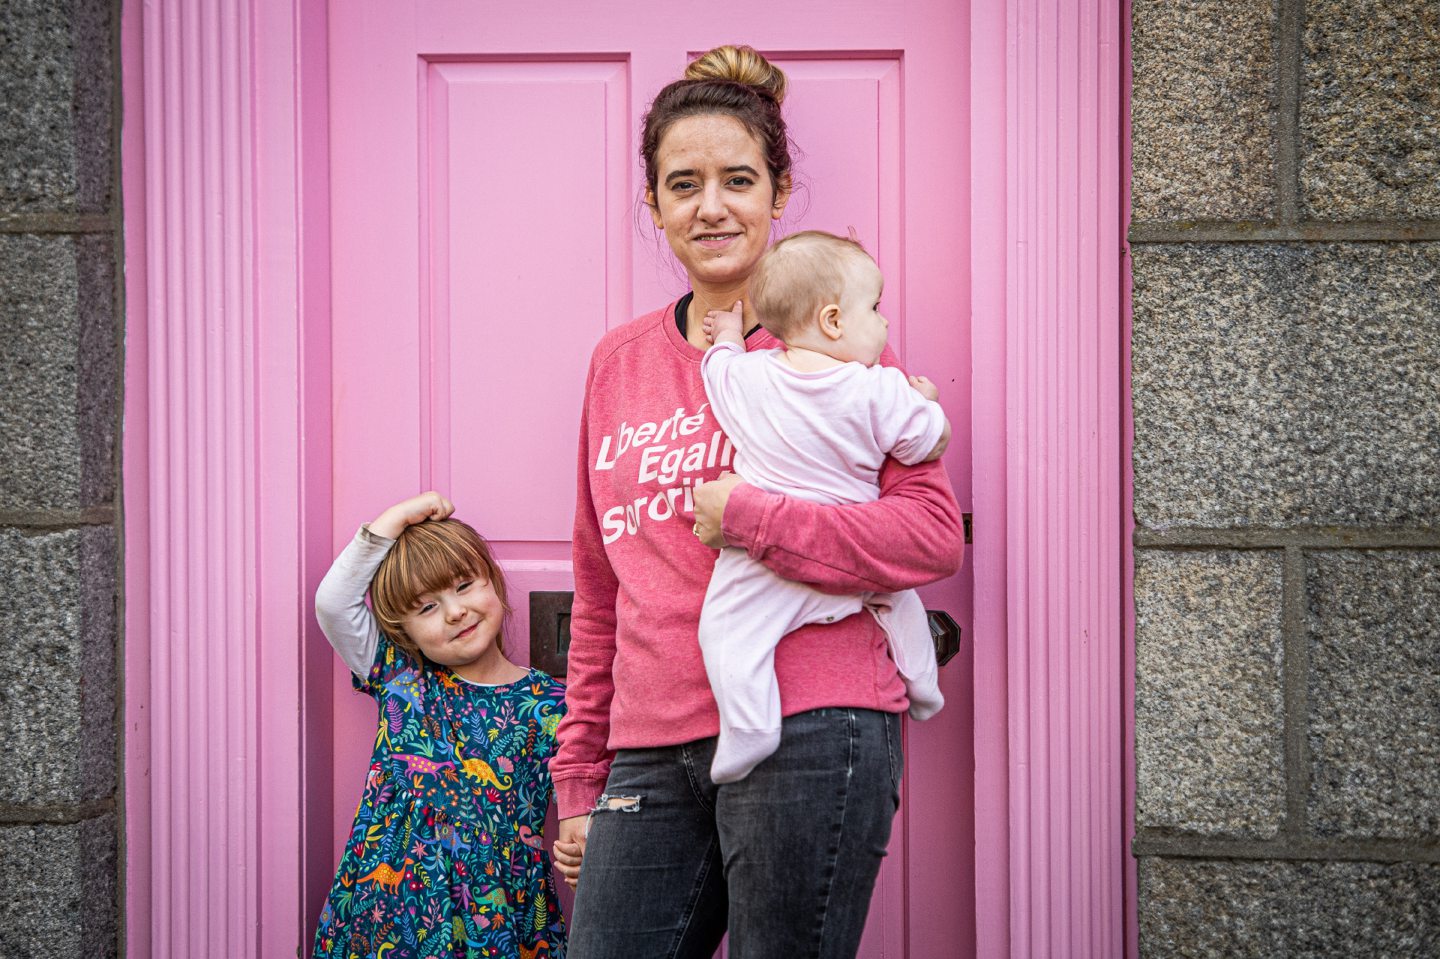 Arleen, of Aberdeen, had a "lightbulb moment" that led to her becoming a doula. Image: Wullie Marr / DC Thomson